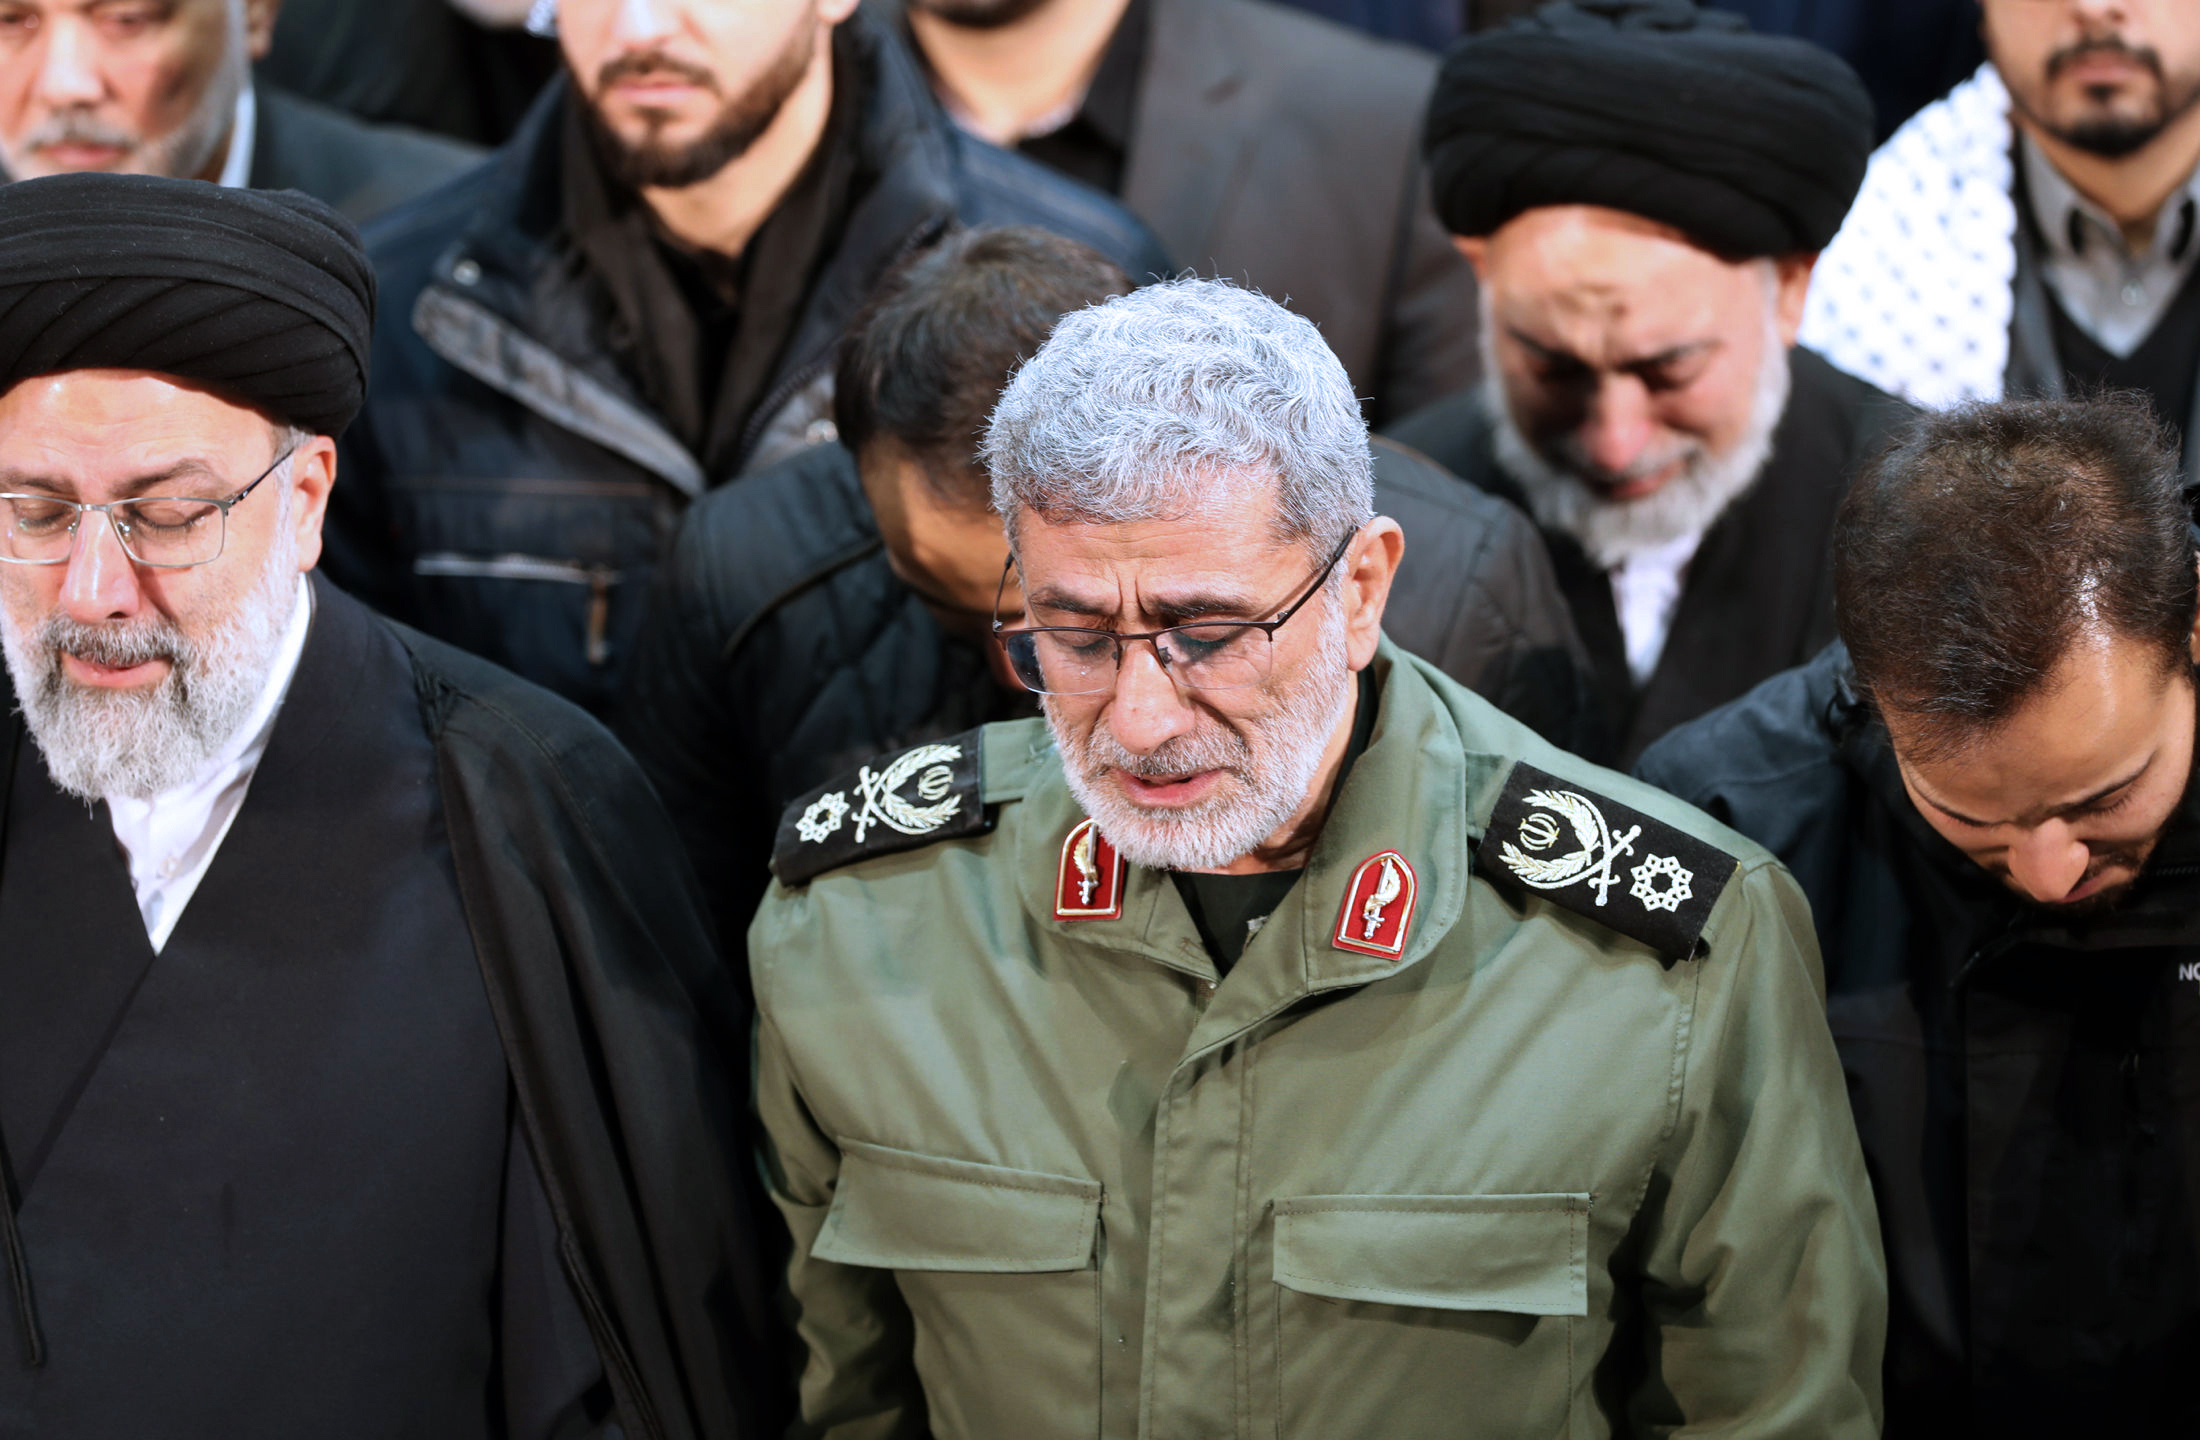 In this photo released by the official website of the Office of the Iranian Supreme Leader, Gen. Esmail Ghaani, newly appointed commander of Iran's Revolutionary Guards Quds Force, weeps while praying over the coffin of the force's previous head Gen. Qassem Soleimani at the Tehran University Campus in Tehran, Iran, Monday, Jan. 6, 2020. Soleimani was killed Friday, Jan. 3 in a U.S. drone attack in Iraq. (Office of the Iranian Supreme Leader via AP)